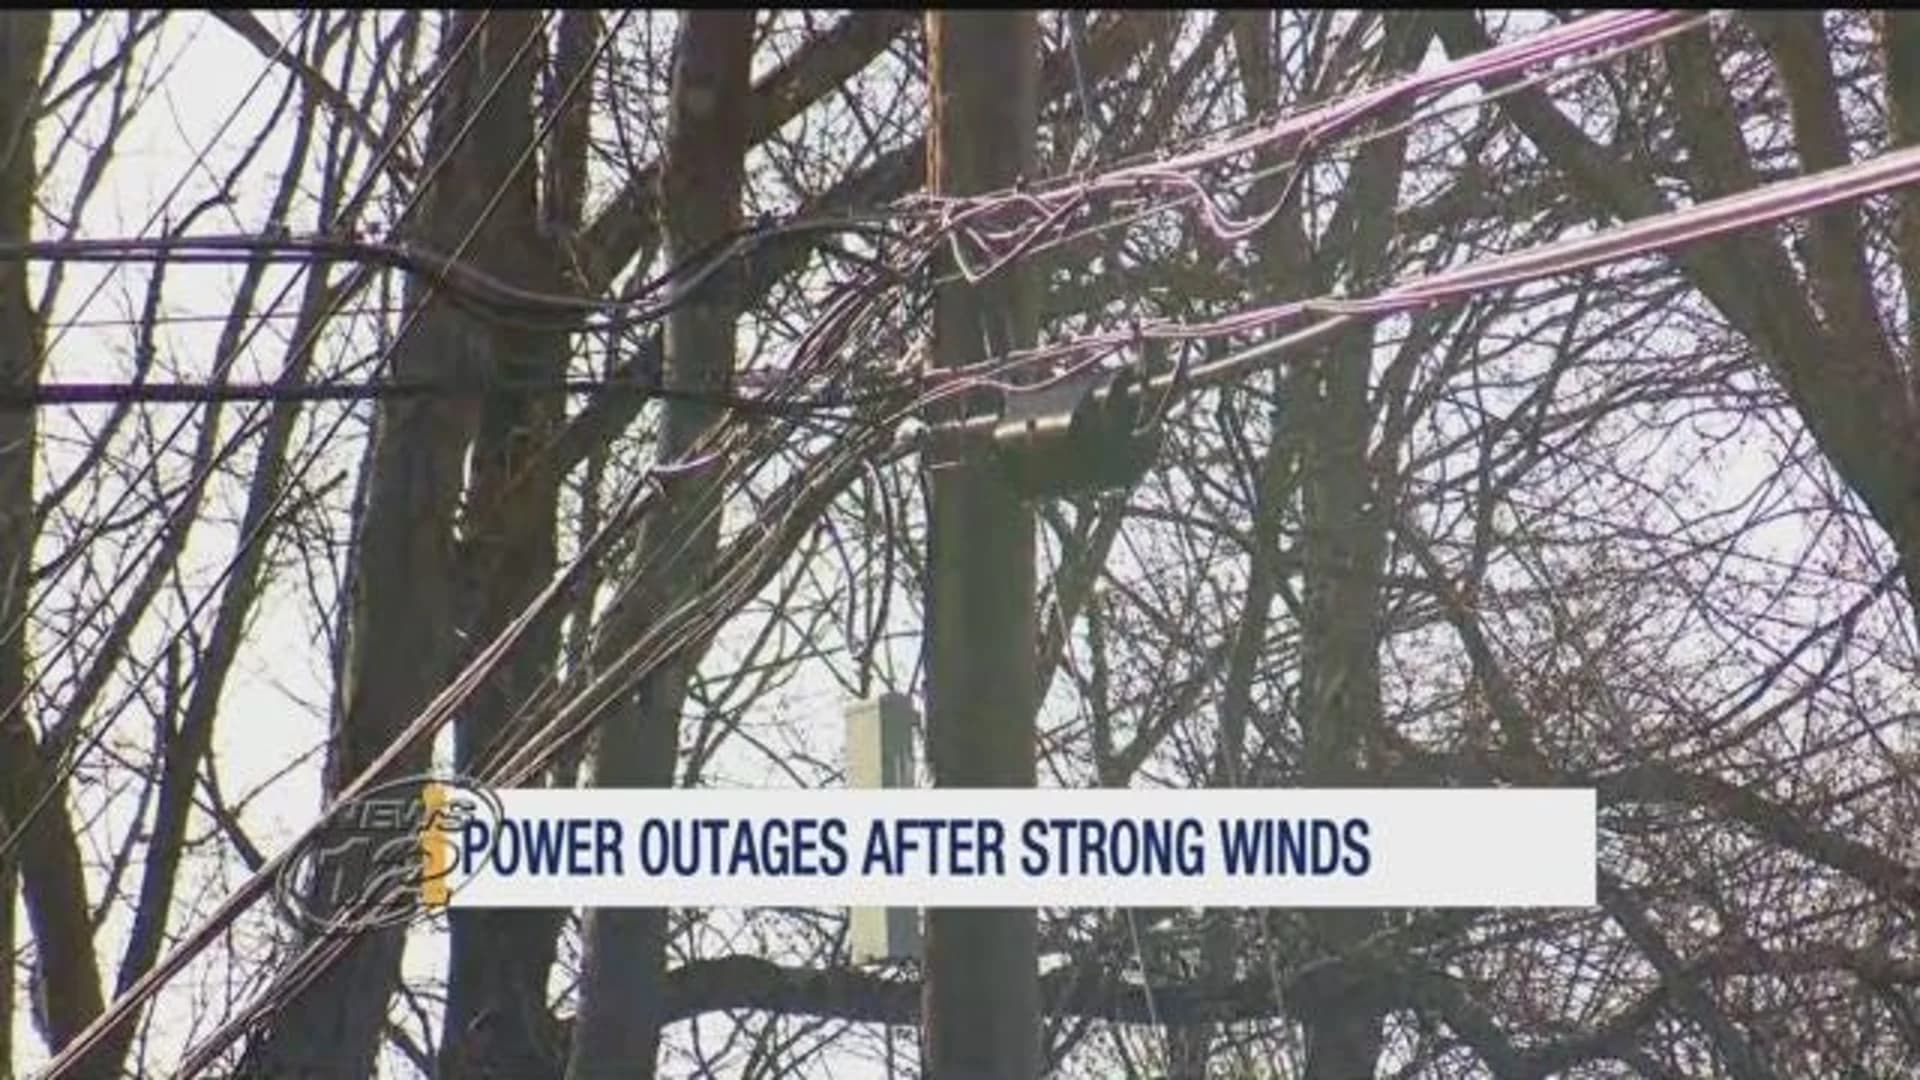 Pressure on utility companies could have role in quick power restoration